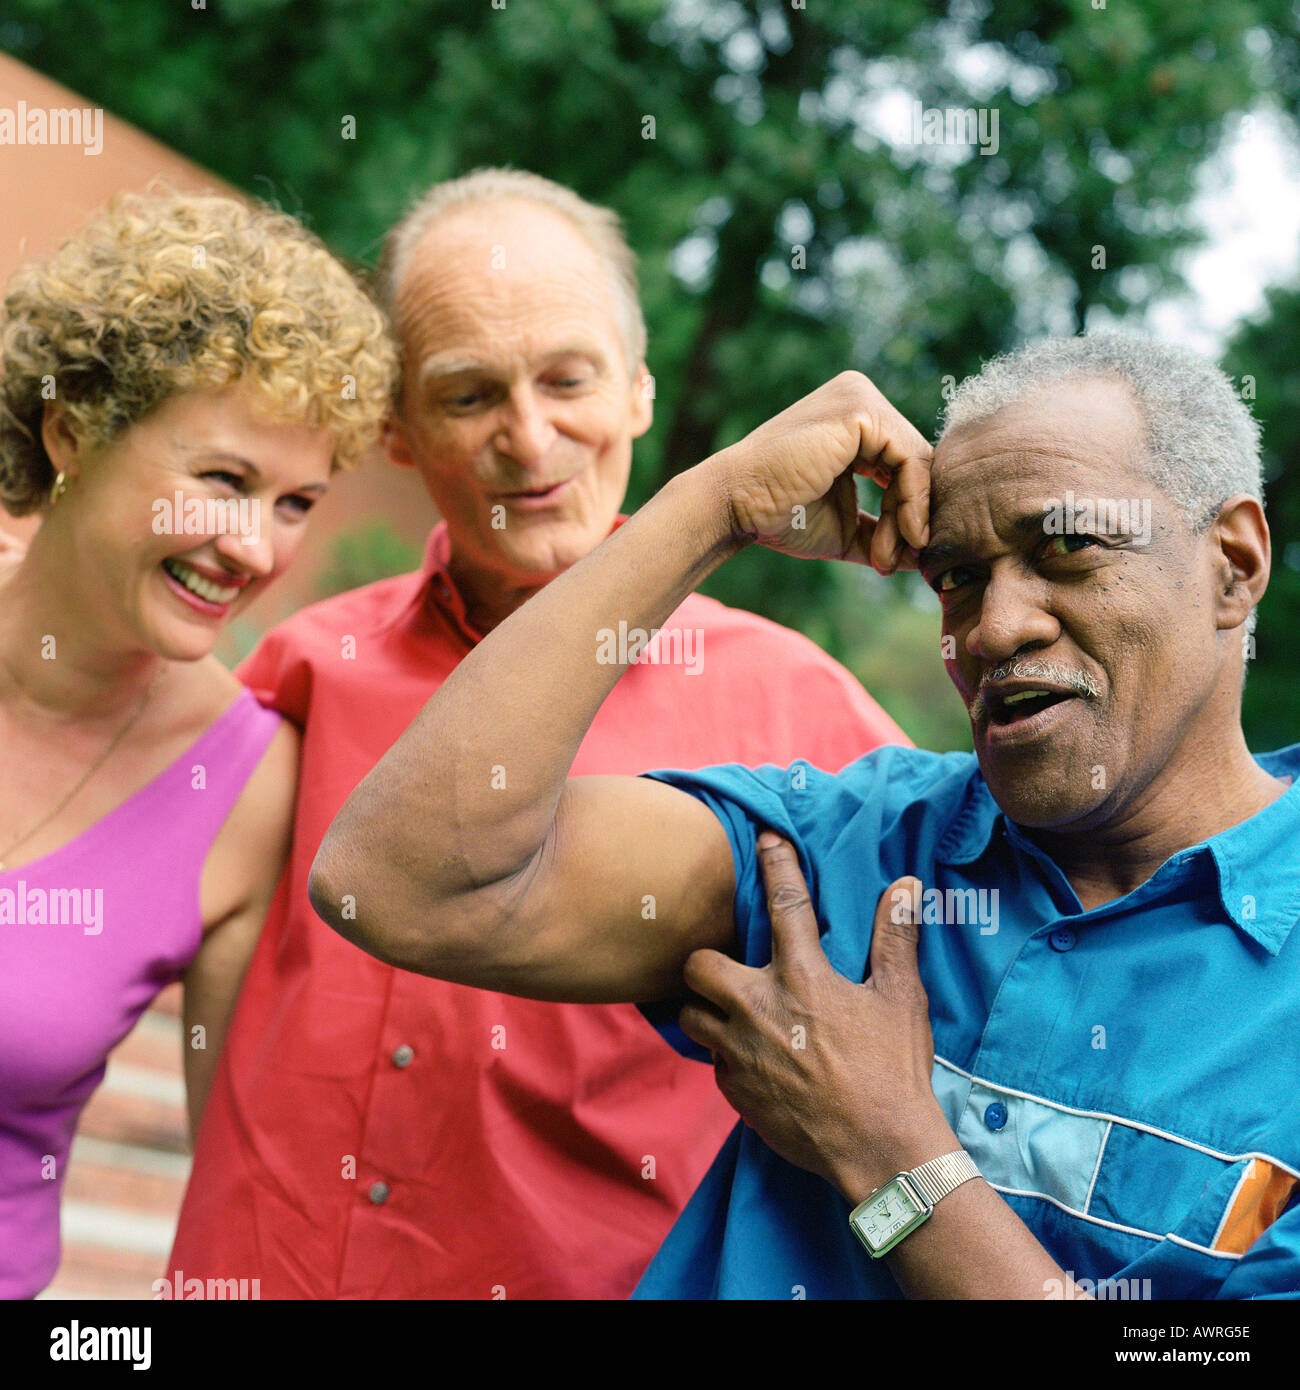 Three people standing outside, man flexing arm muscles Stock Photo